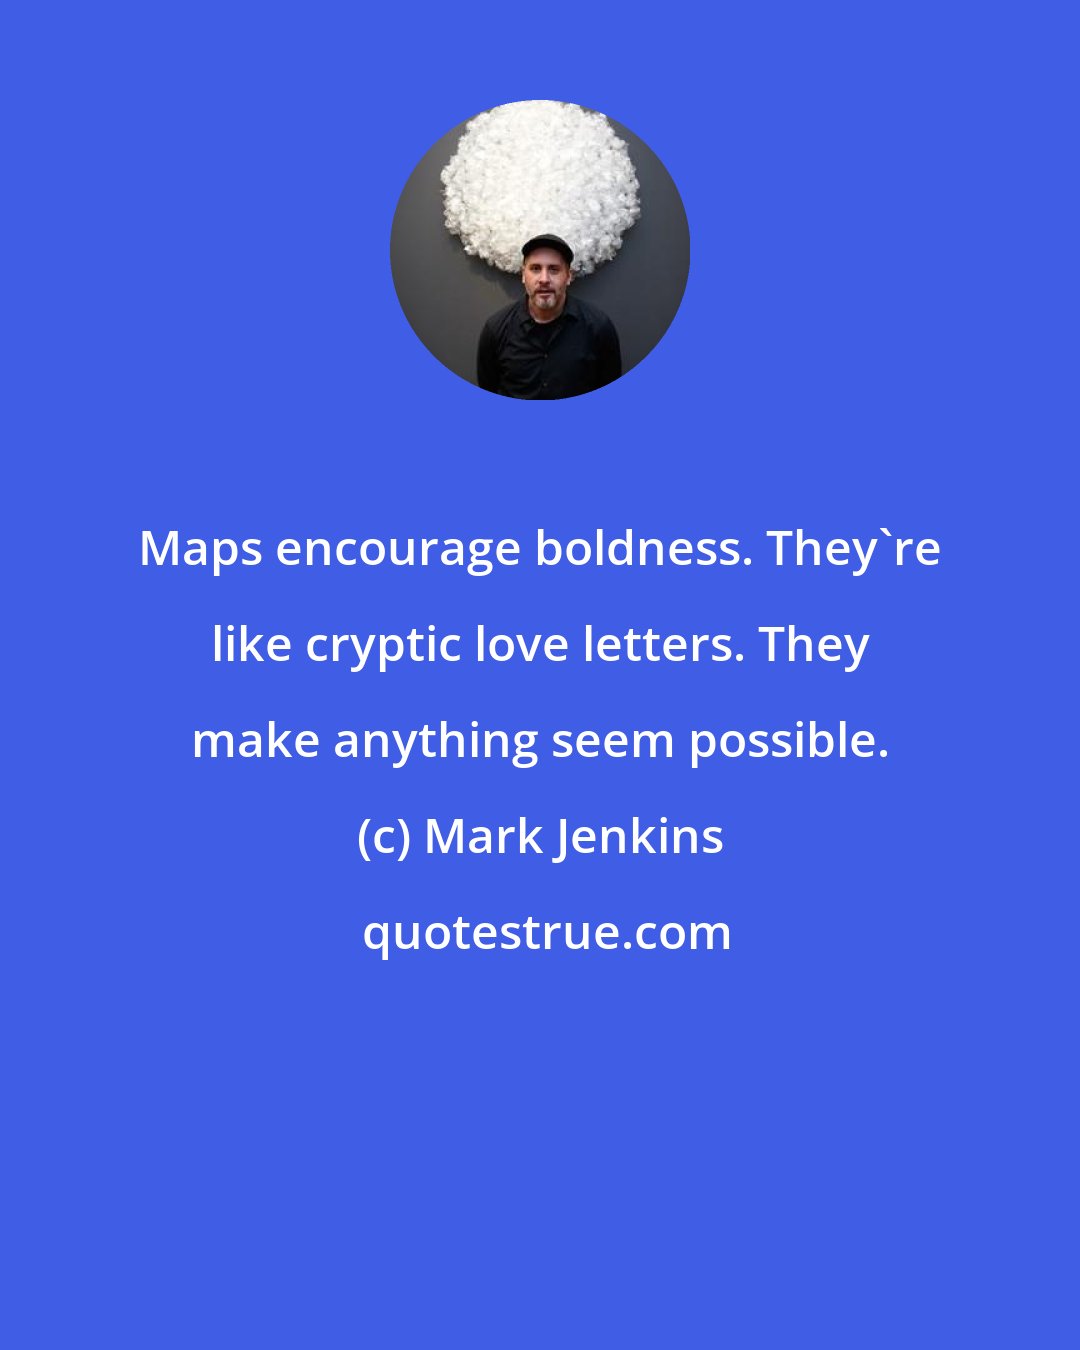 Mark Jenkins: Maps encourage boldness. They're like cryptic love letters. They make anything seem possible.